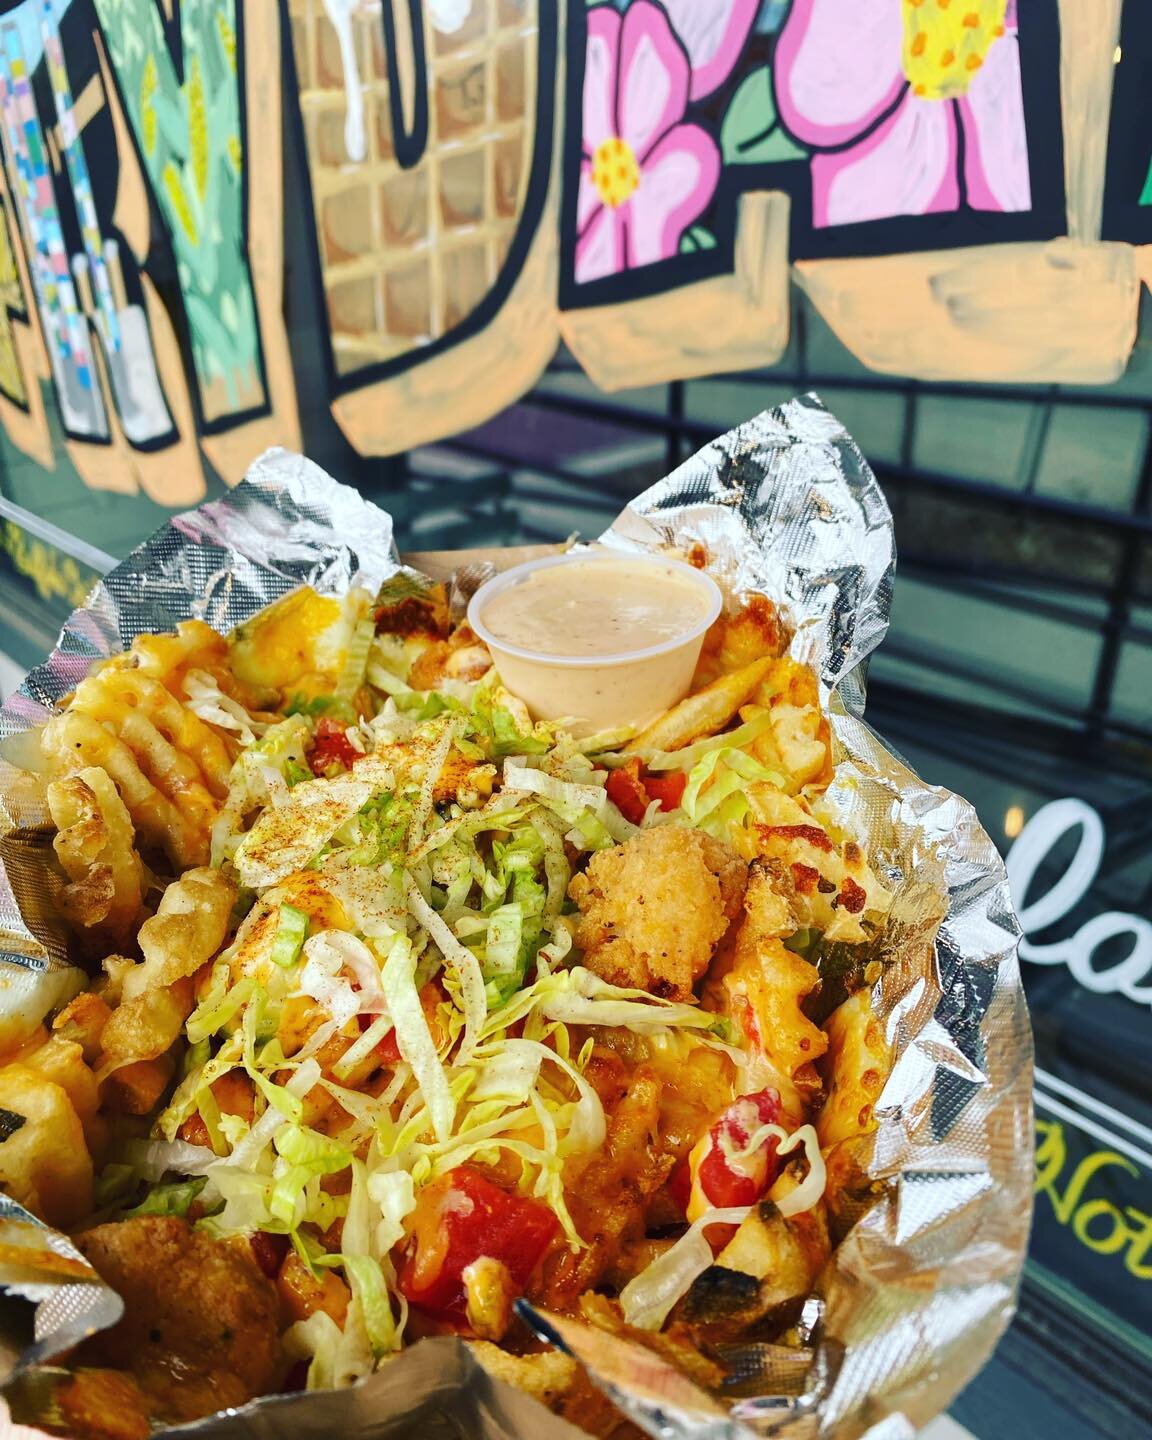 Laissez les bon temps rouler!!!! 

Hey!! Don&rsquo;t miss this good time👇👇👇
Only a few more weeks left to try these tasty Cajun Shrimp Po&rsquo; Boy fries! 🌶️ 

These are so good and packed with a robust Cajun flavor with lots of spices like caye